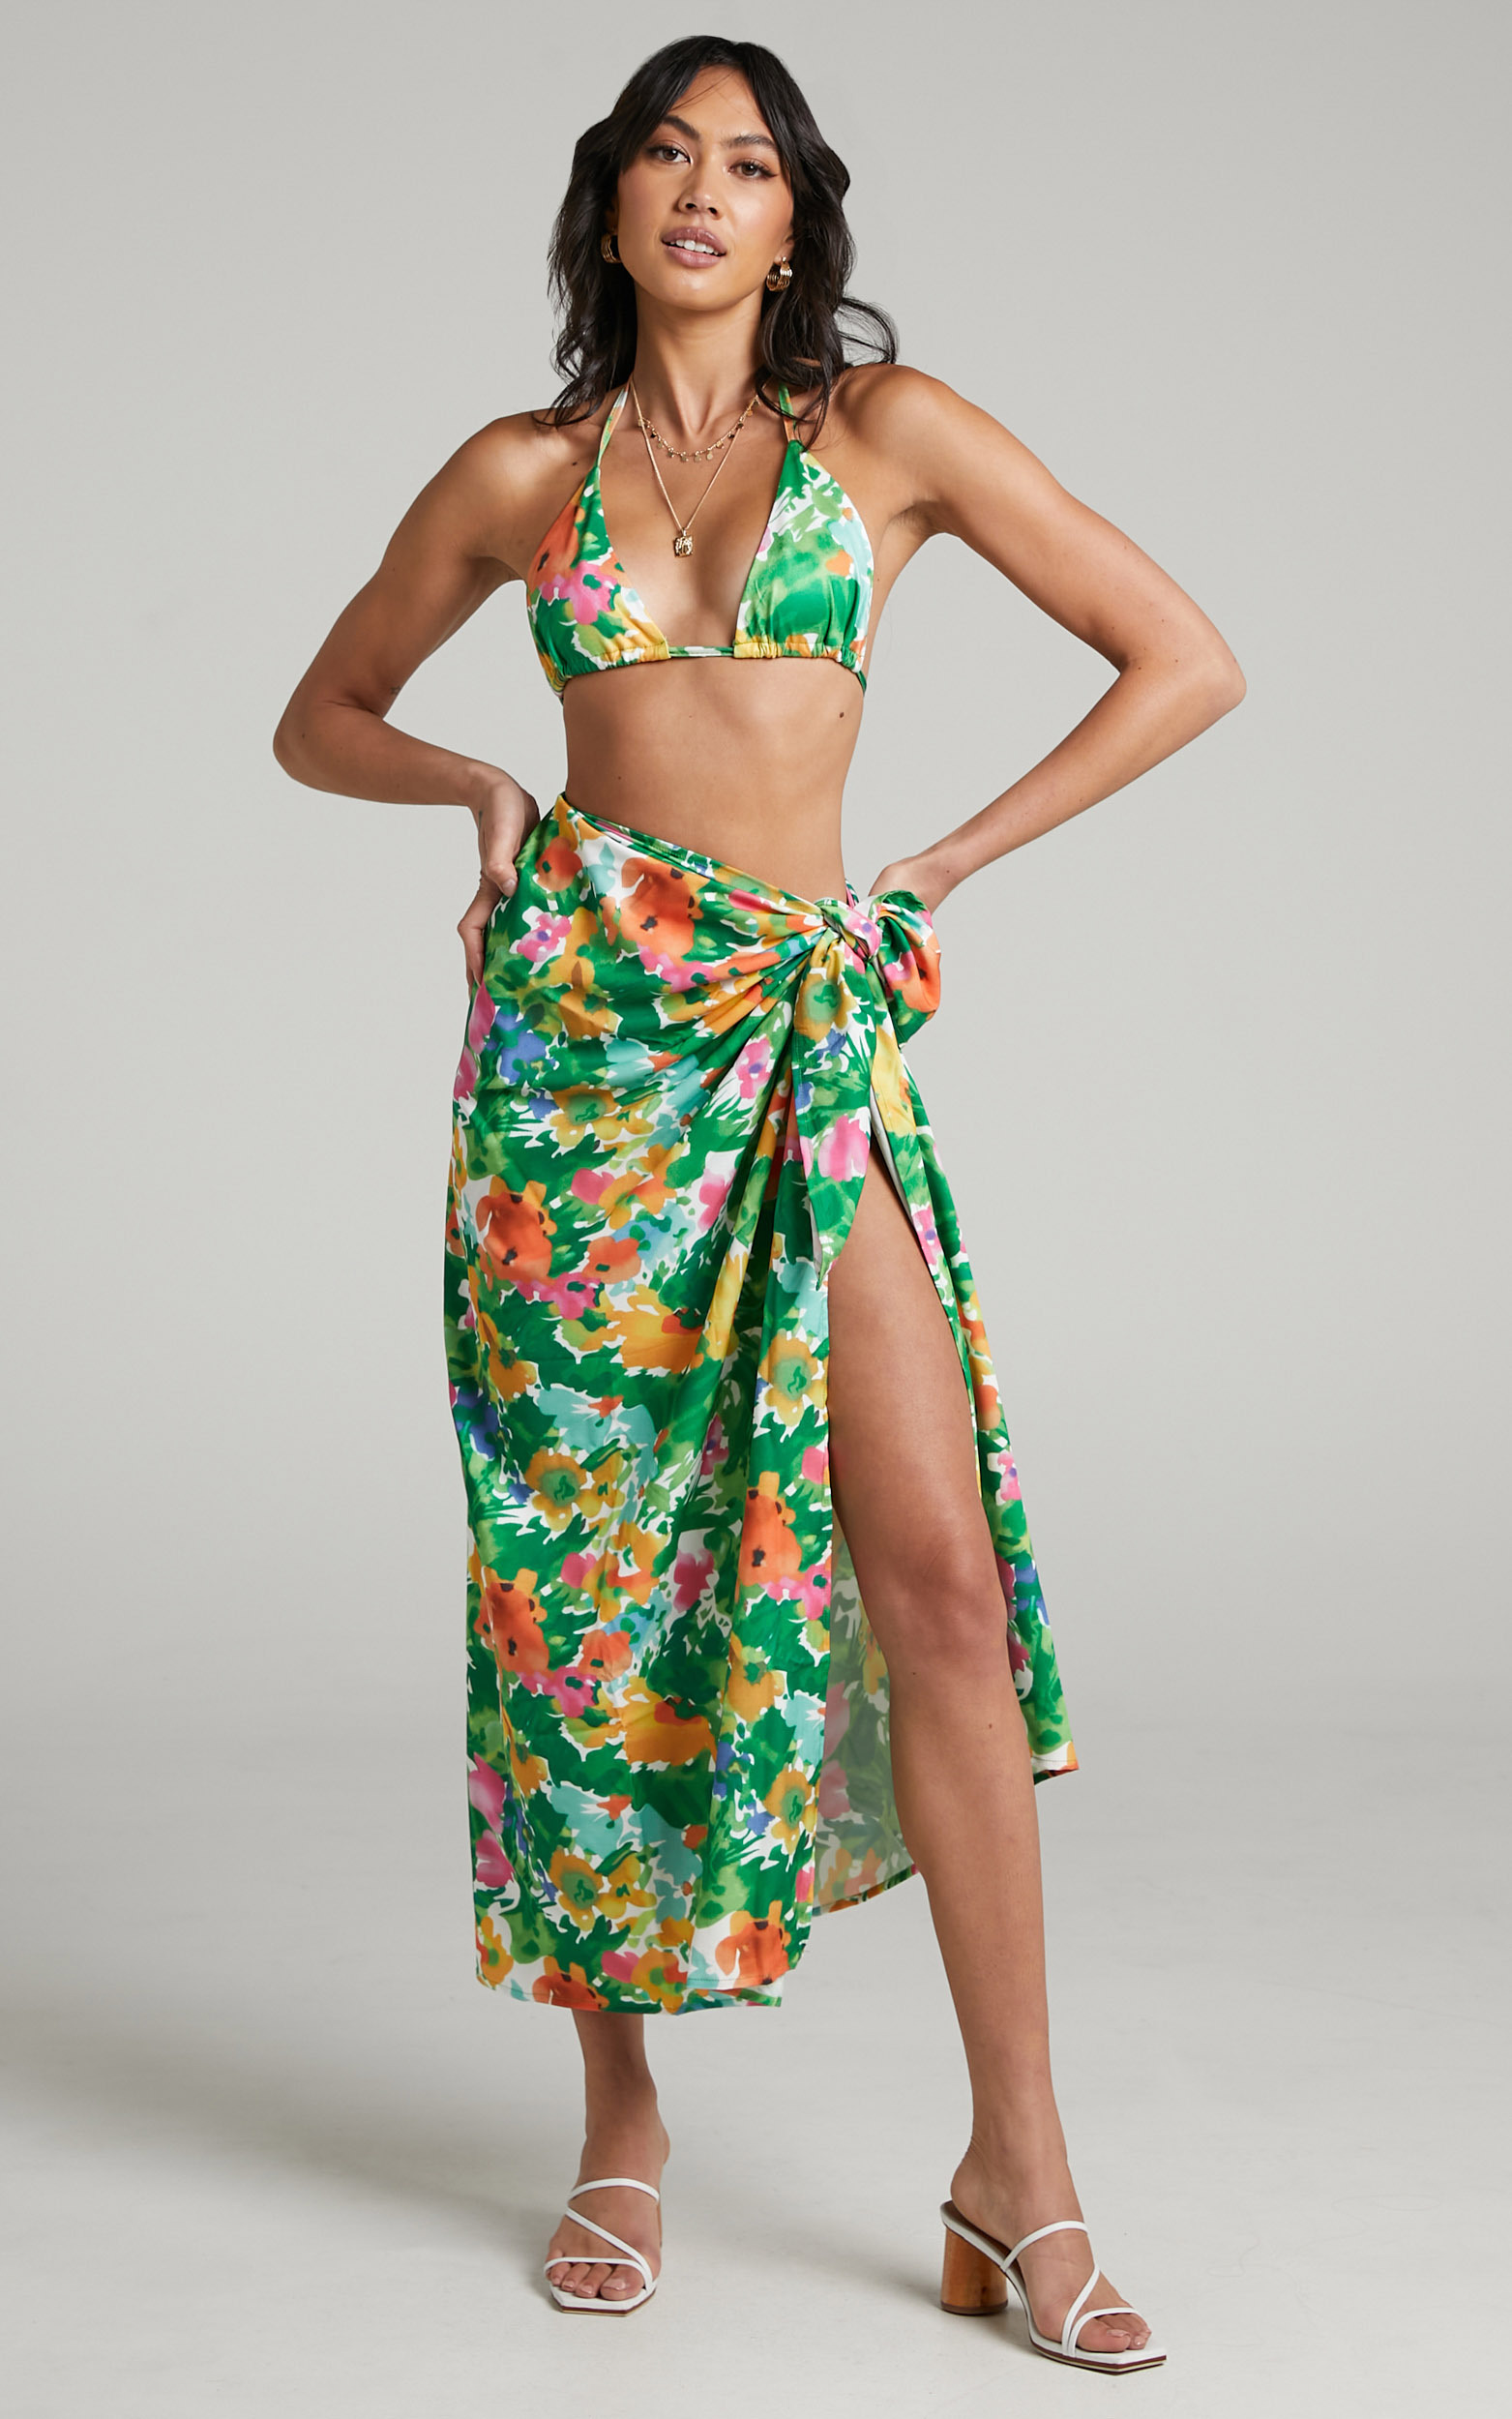 Esclera Triangle Top Midi Skirt Two Piece Set in Green Floral - L, GRN1, hi-res image number null